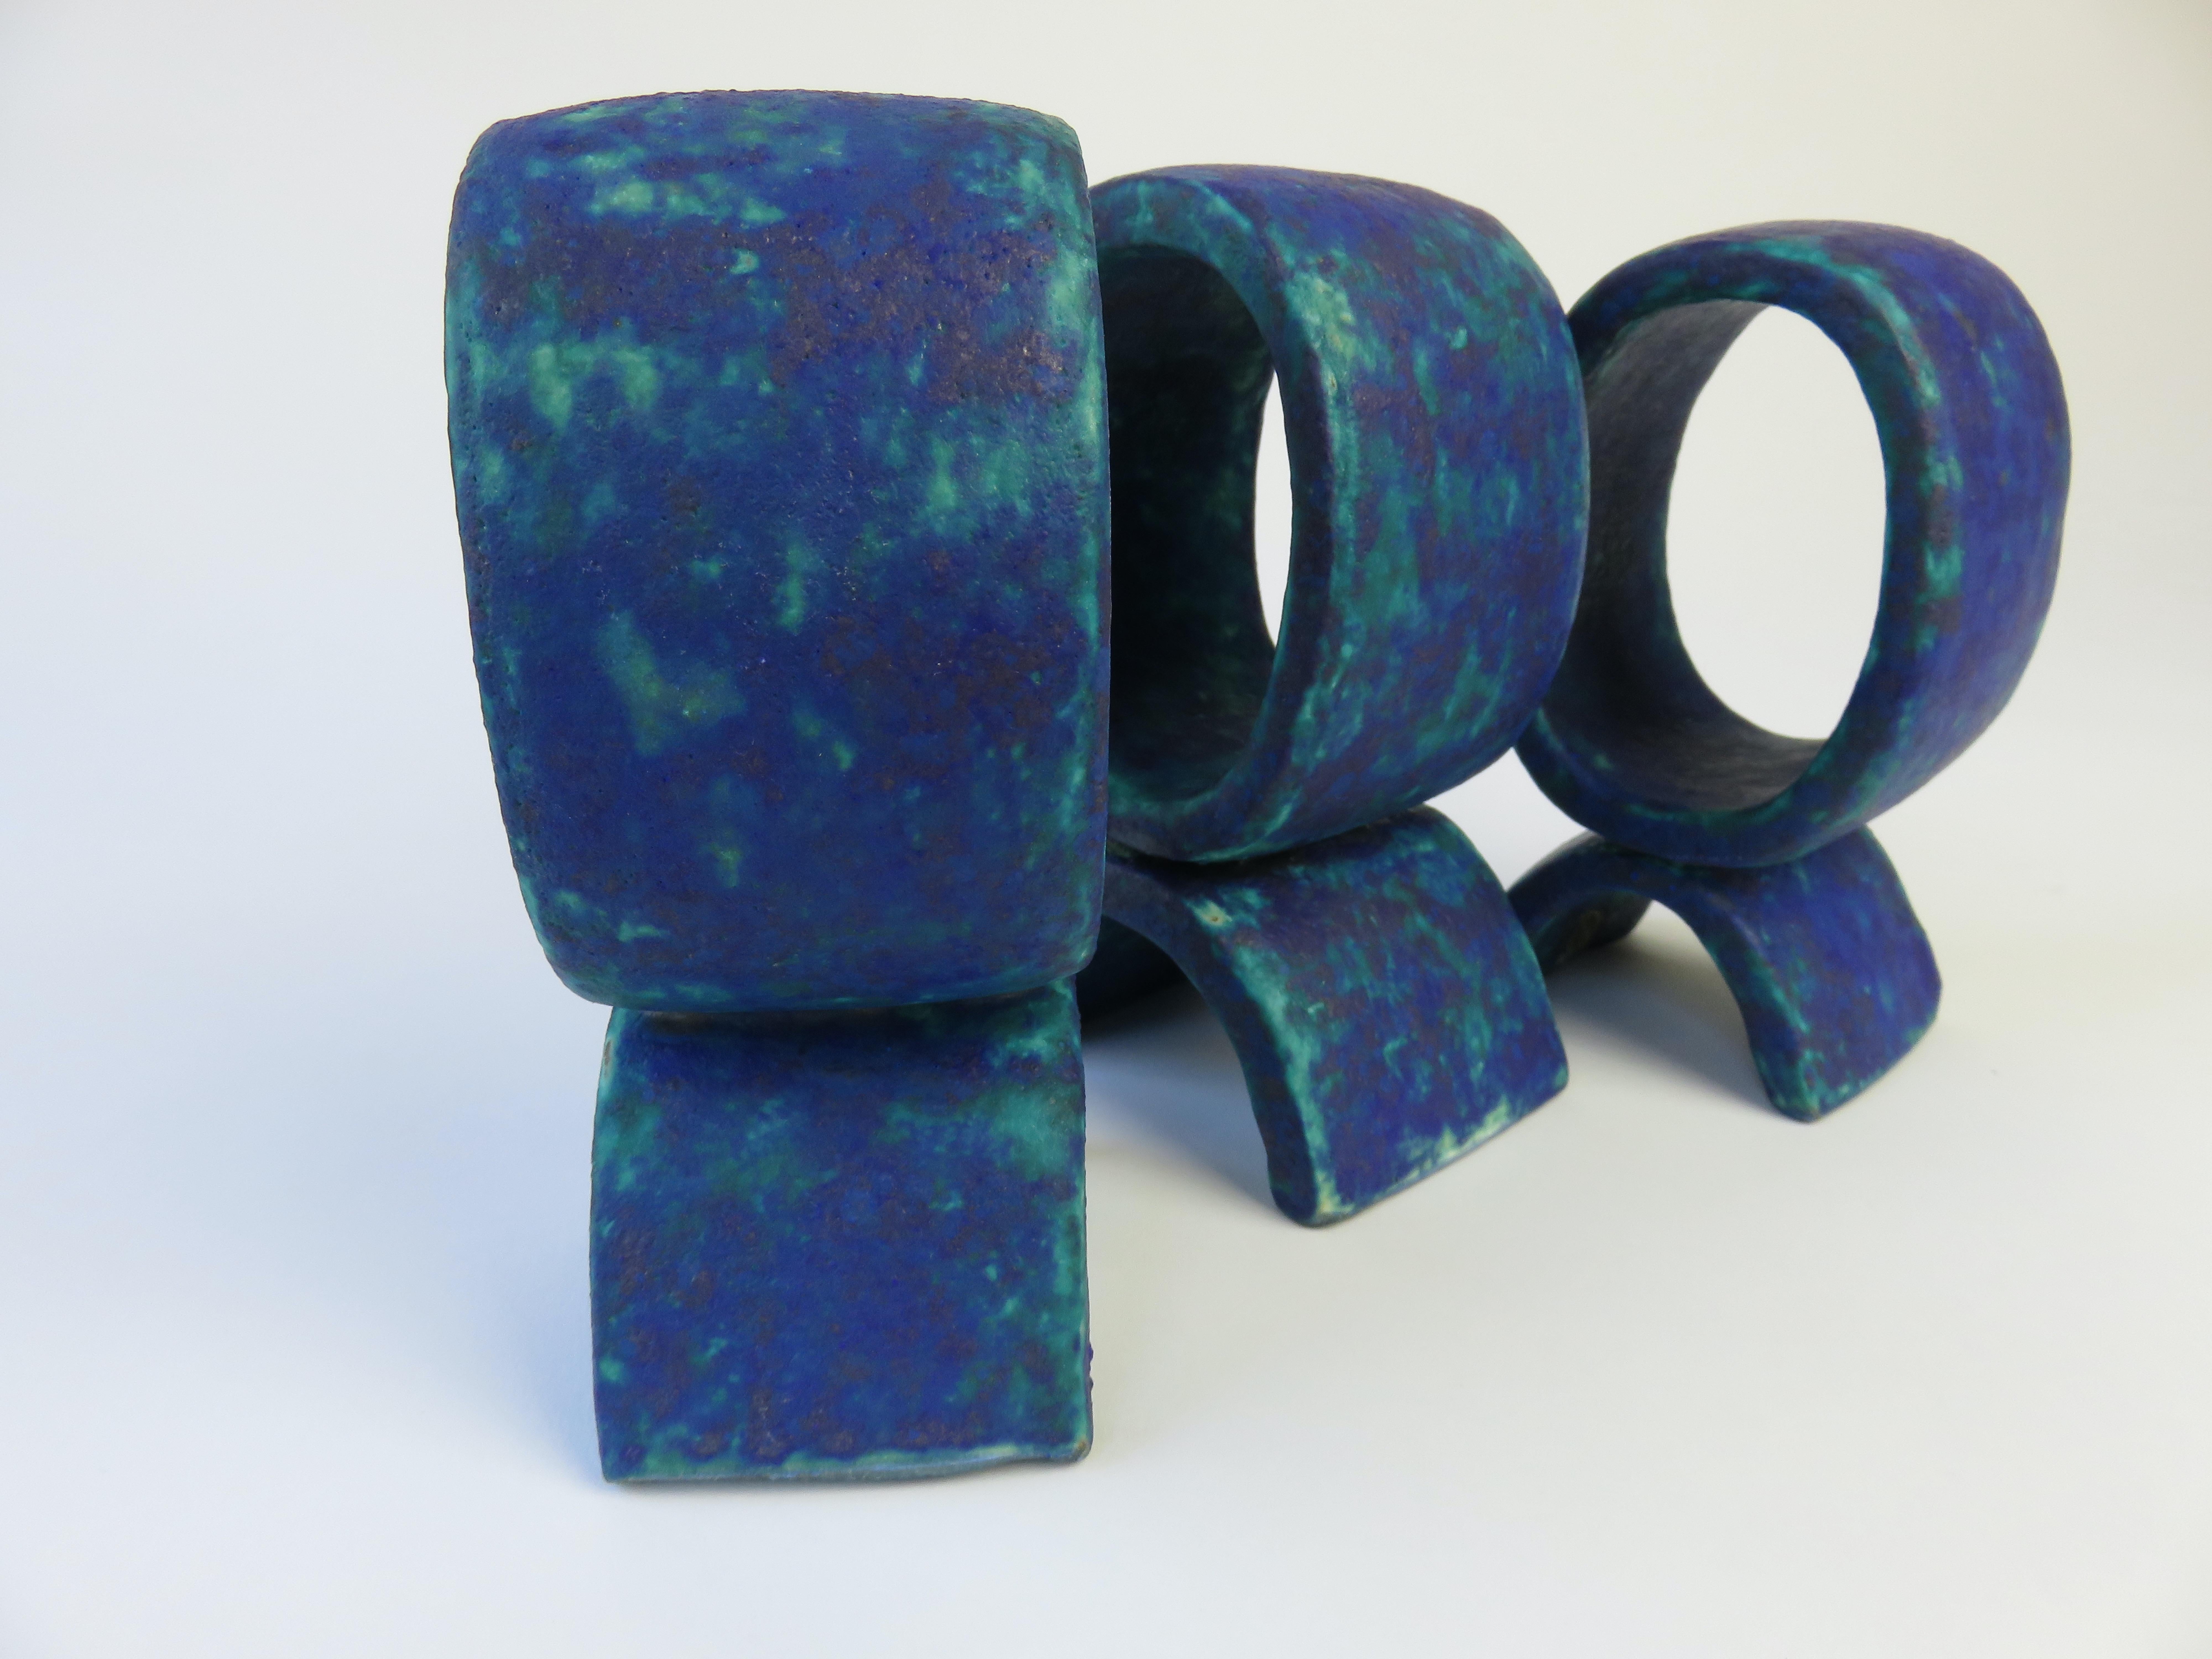 Mottled Turquoise and Deep Blue, 3 Ceramic Totems, Single Rings on Curved Legs For Sale 8